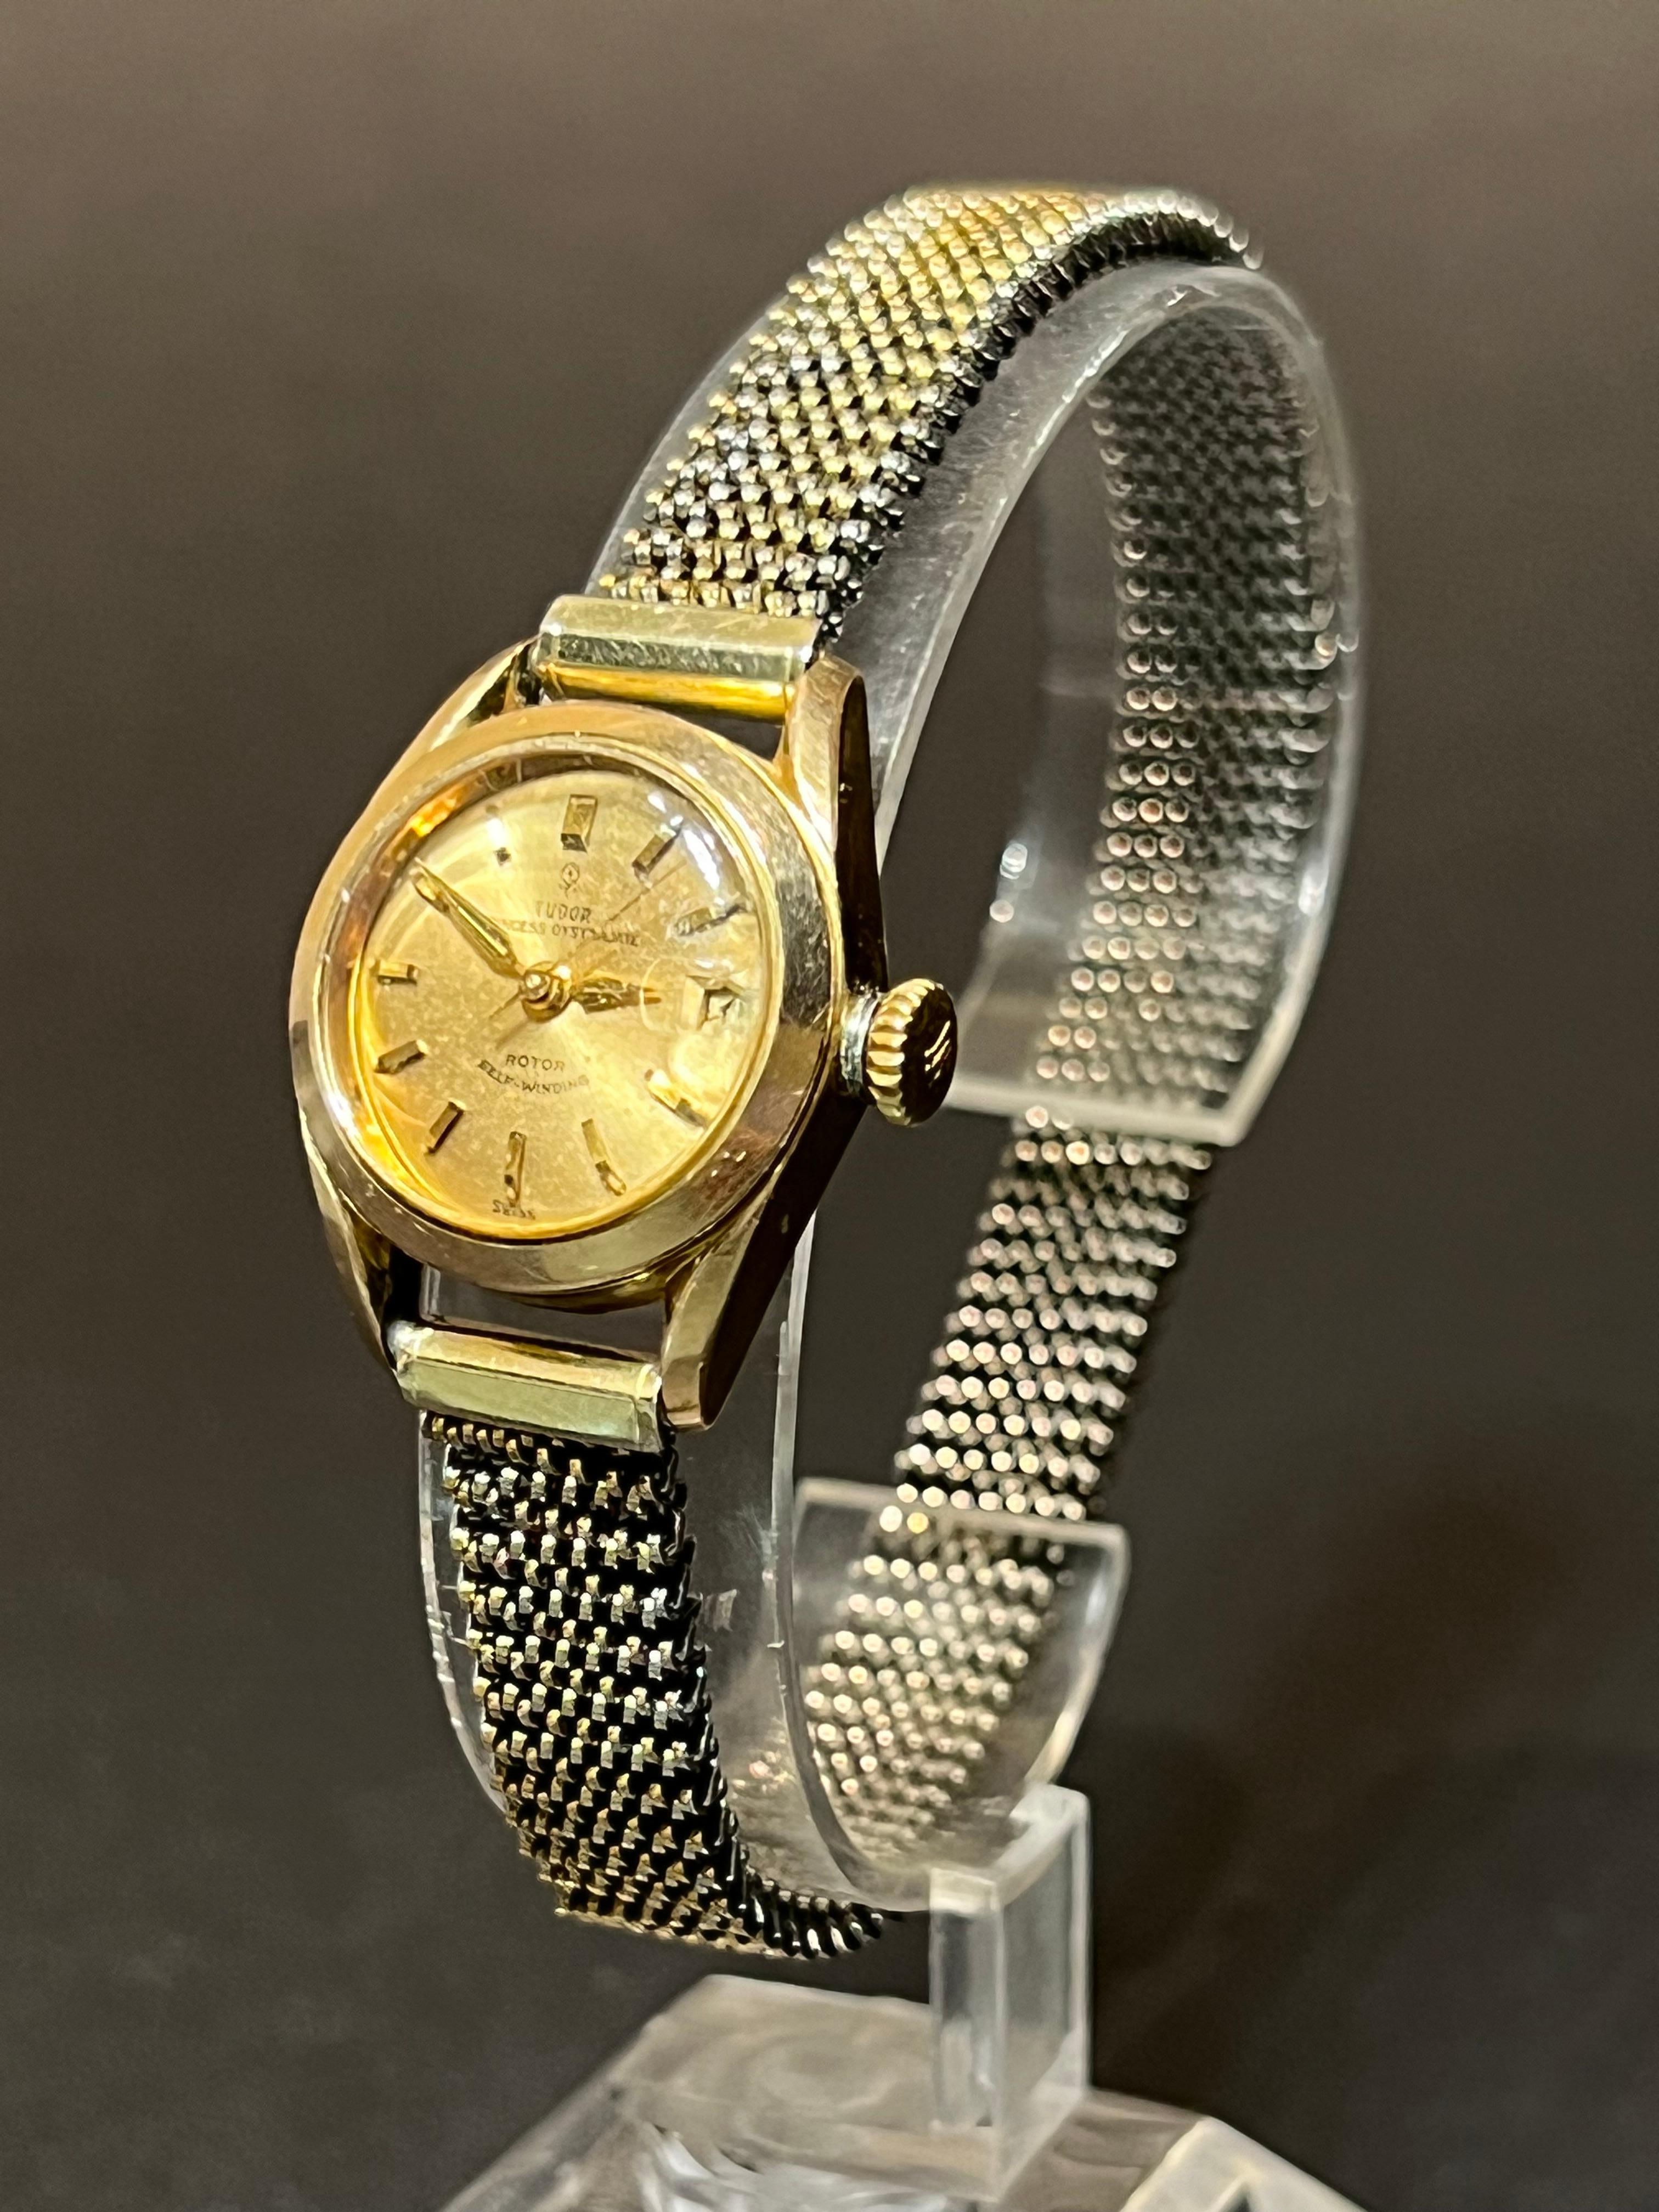 1966 Rolex Tudor Oyster Princess Gold Wristwatch In Good Condition For Sale In Bradford, Ontario